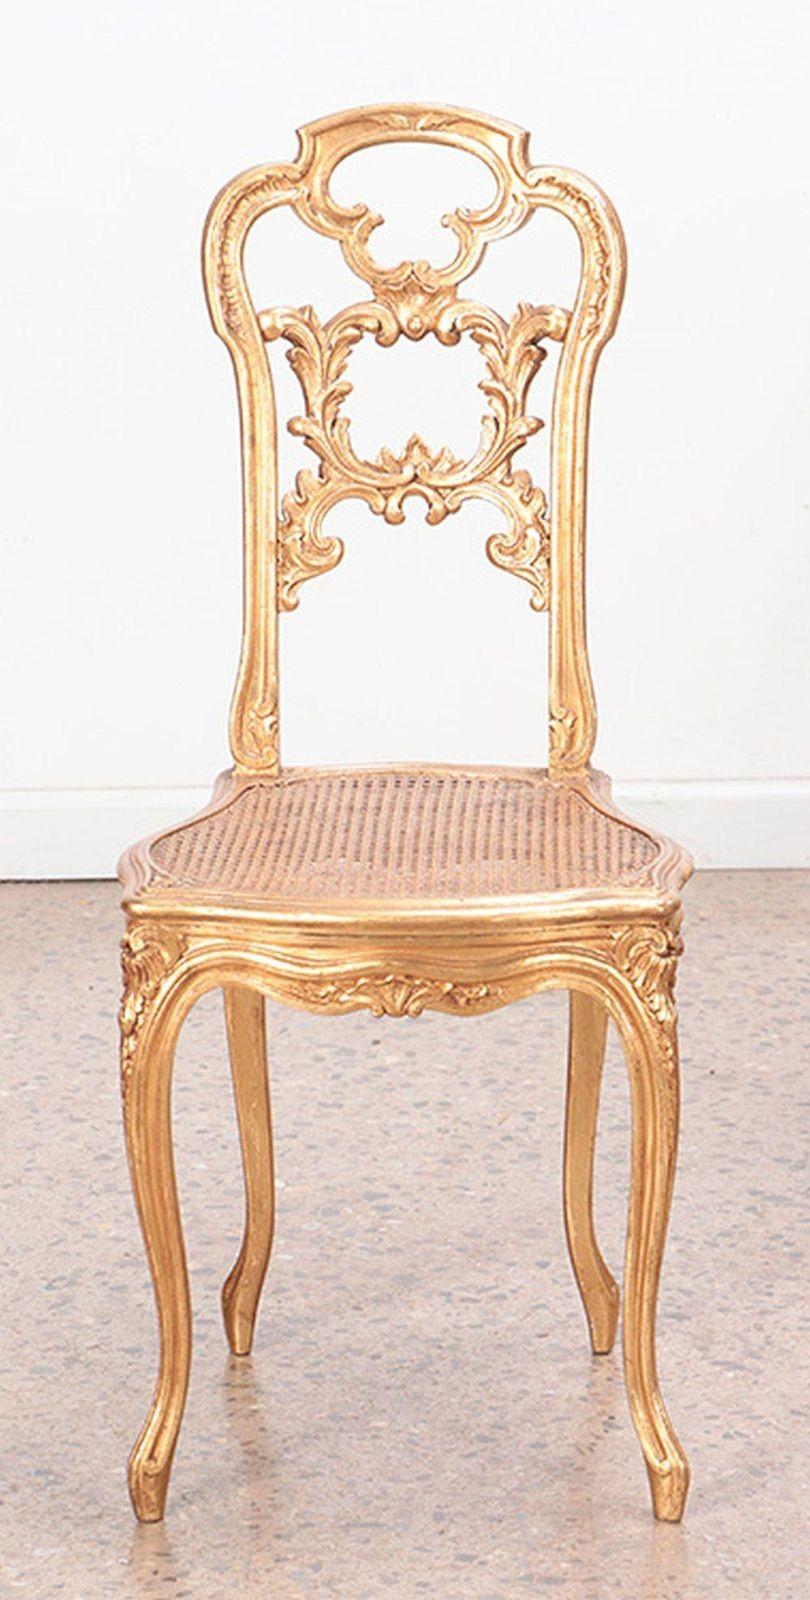 French Louis XV giltwood side chairs with hand carved foliate motif details all around. The rich gilt finish adds a touch of glamour and radiance to the chairs. Made in France, c. 1910's.
Dimensions:
35.5